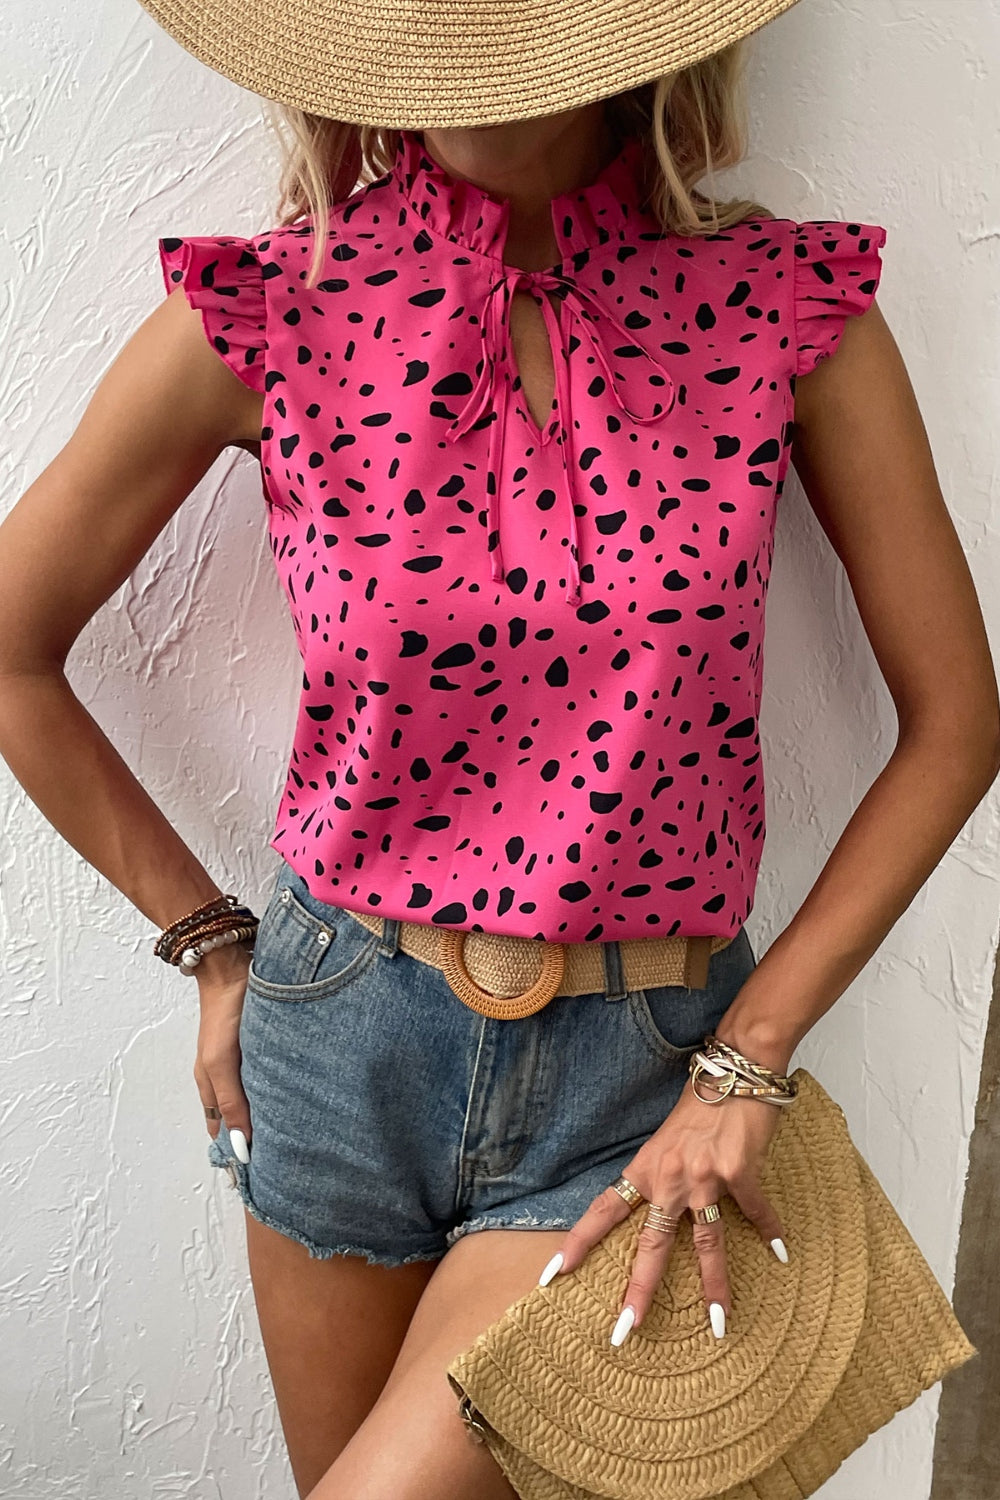 Tied Printed Tie Neck Cap Sleeve Blouse Shirts & Tops Krazy Heart Designs Boutique Cerise S 